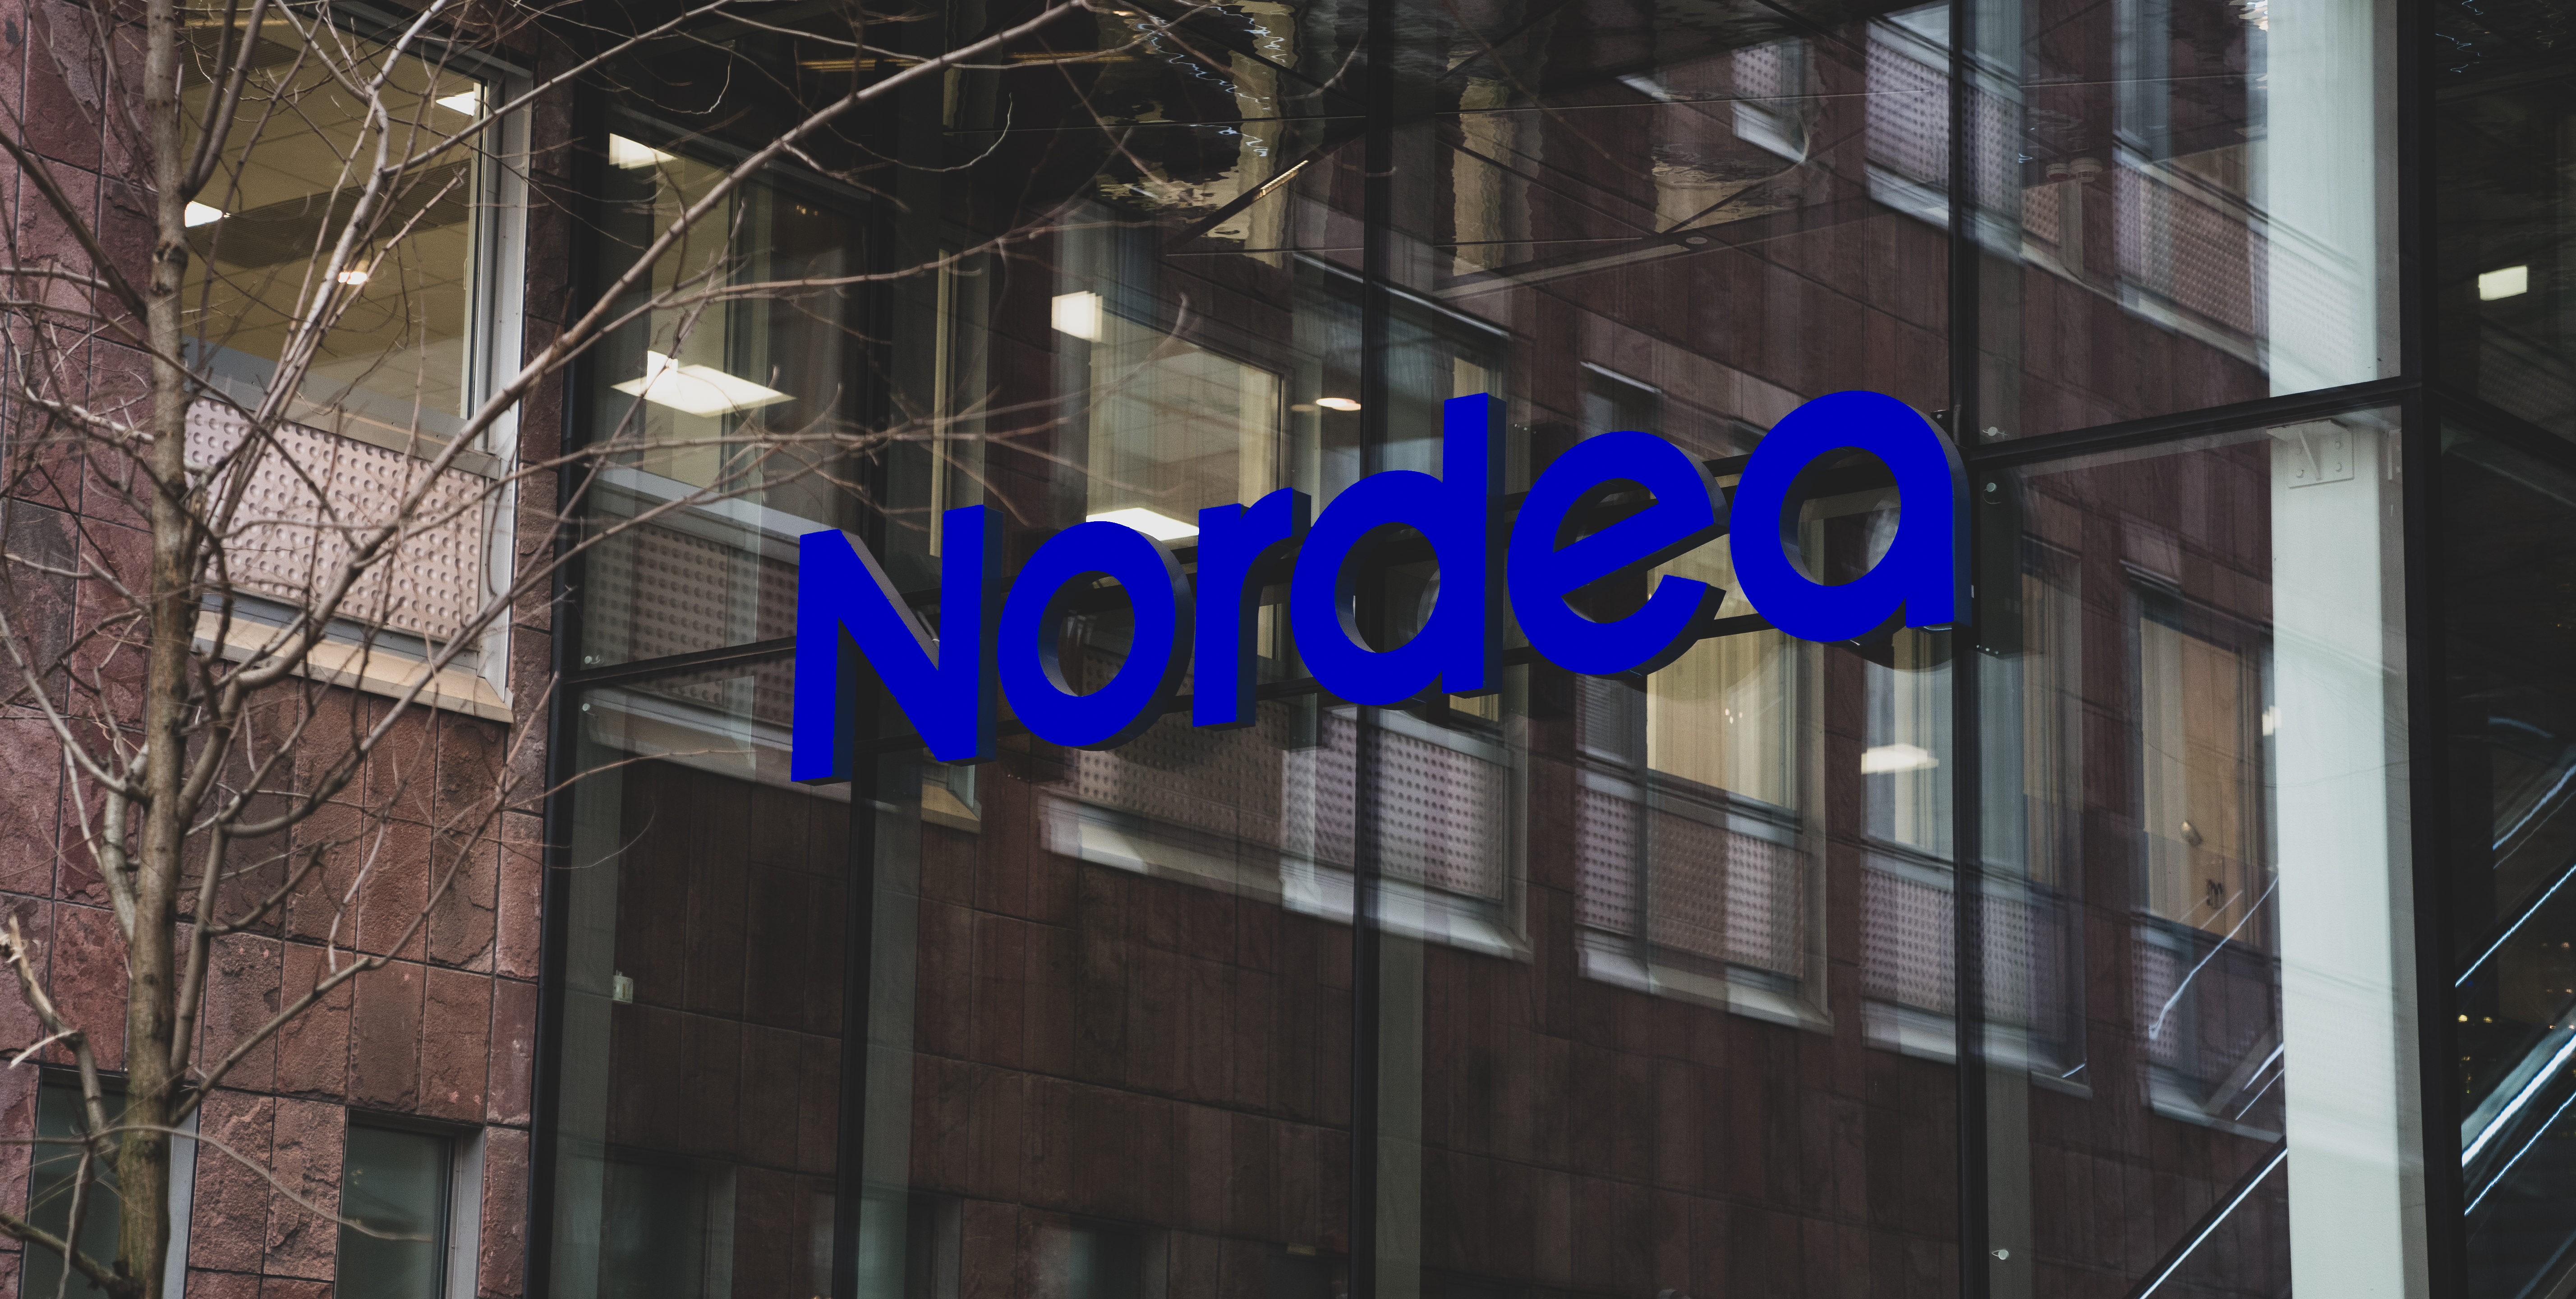 Communication Specialist for the Nordic housing market